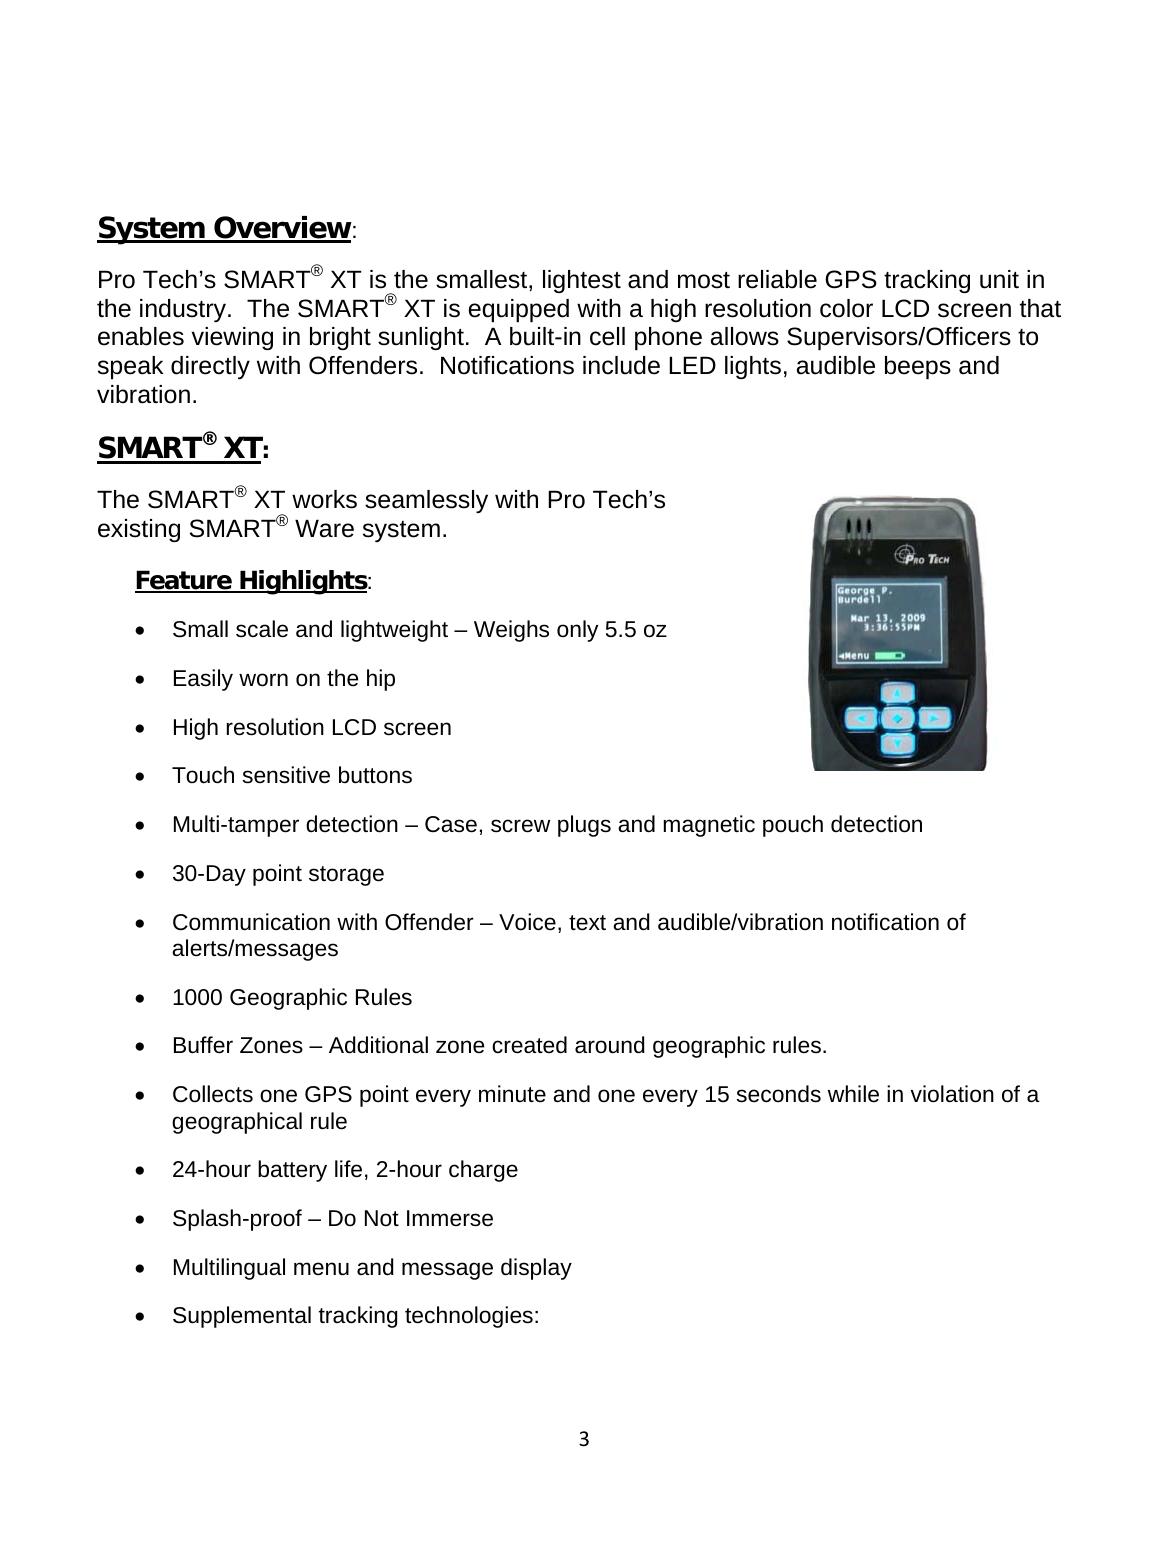 3  System Overview: Pro Tech’s SMART® XT is the smallest, lightest and most reliable GPS tracking unit in the industry.  The SMART® XT is equipped with a high resolution color LCD screen that enables viewing in bright sunlight.  A built-in cell phone allows Supervisors/Officers to speak directly with Offenders.  Notifications include LED lights, audible beeps and vibration.   SMART® XT: The SMART® XT works seamlessly with Pro Tech’s existing SMART® Ware system.       Feature Highlights: •  Small scale and lightweight – Weighs only 5.5 oz •  Easily worn on the hip •  High resolution LCD screen •  Touch sensitive buttons •  Multi-tamper detection – Case, screw plugs and magnetic pouch detection •  30-Day point storage •  Communication with Offender – Voice, text and audible/vibration notification of alerts/messages •  1000 Geographic Rules •  Buffer Zones – Additional zone created around geographic rules.   •  Collects one GPS point every minute and one every 15 seconds while in violation of a geographical rule •  24-hour battery life, 2-hour charge •  Splash-proof – Do Not Immerse •  Multilingual menu and message display  •  Supplemental tracking technologies:   